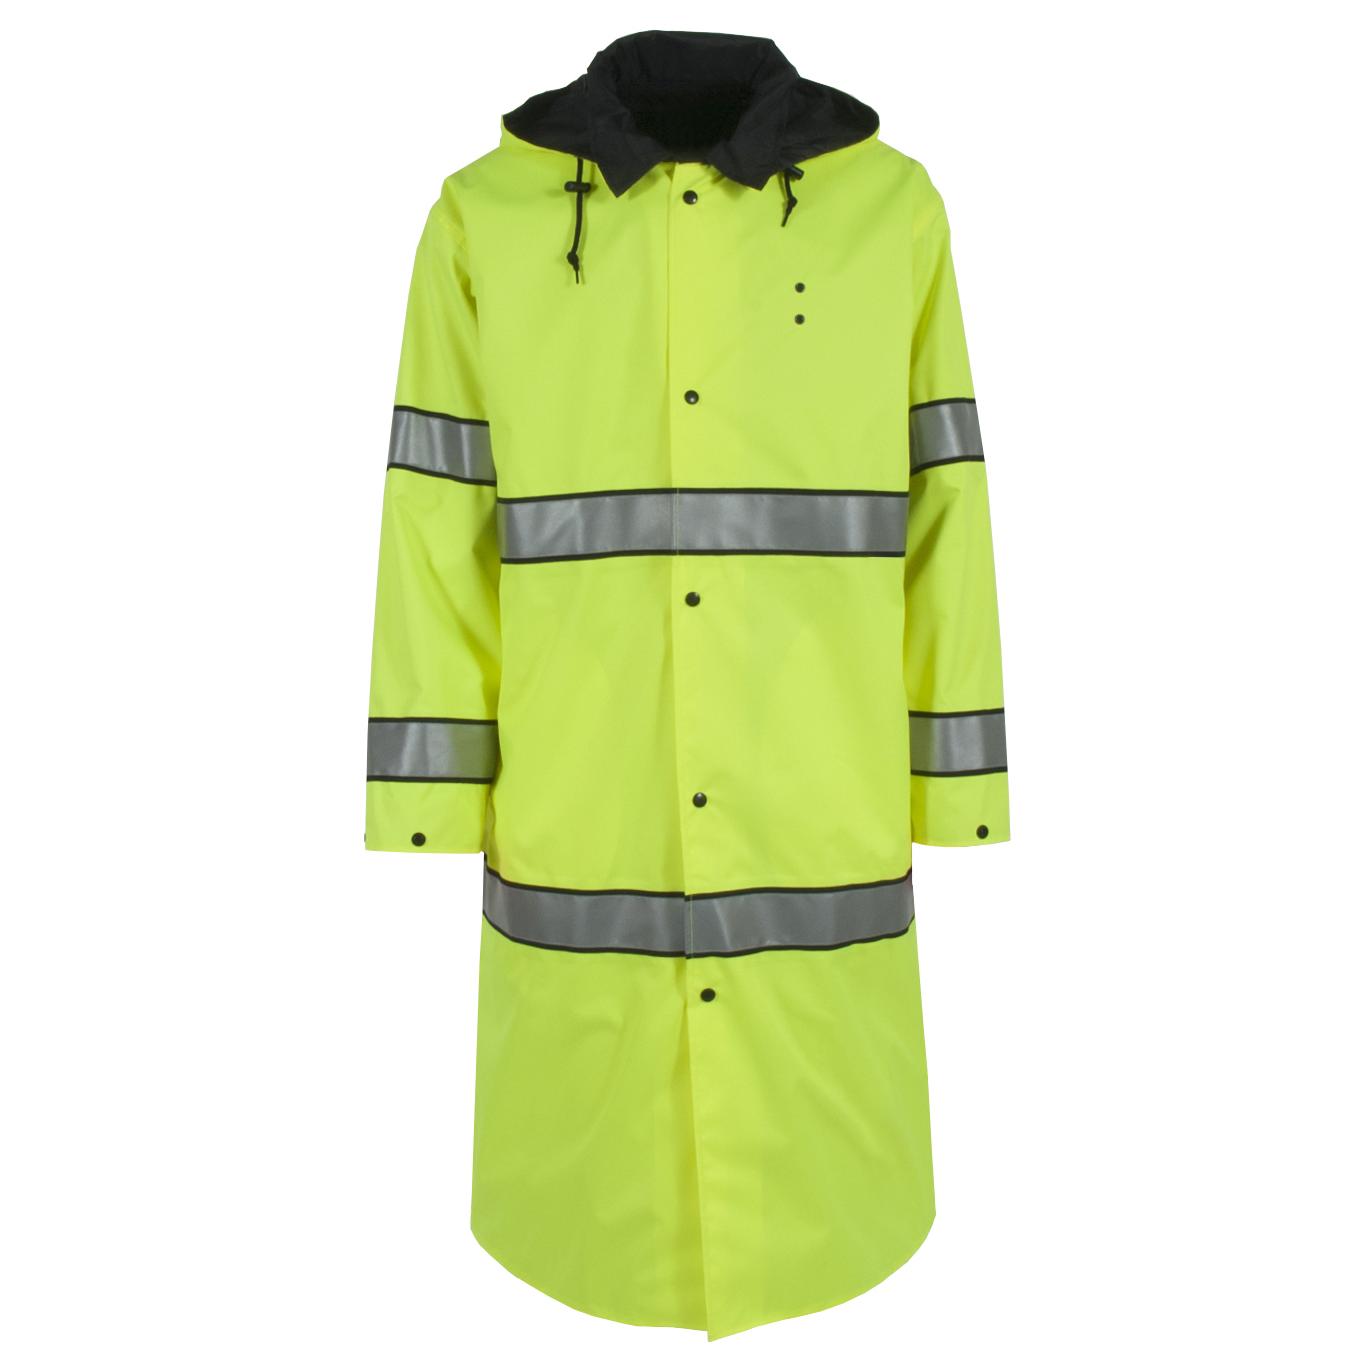 Neese by Radians - A Leader in FR and Rainwear - Full Source Blog